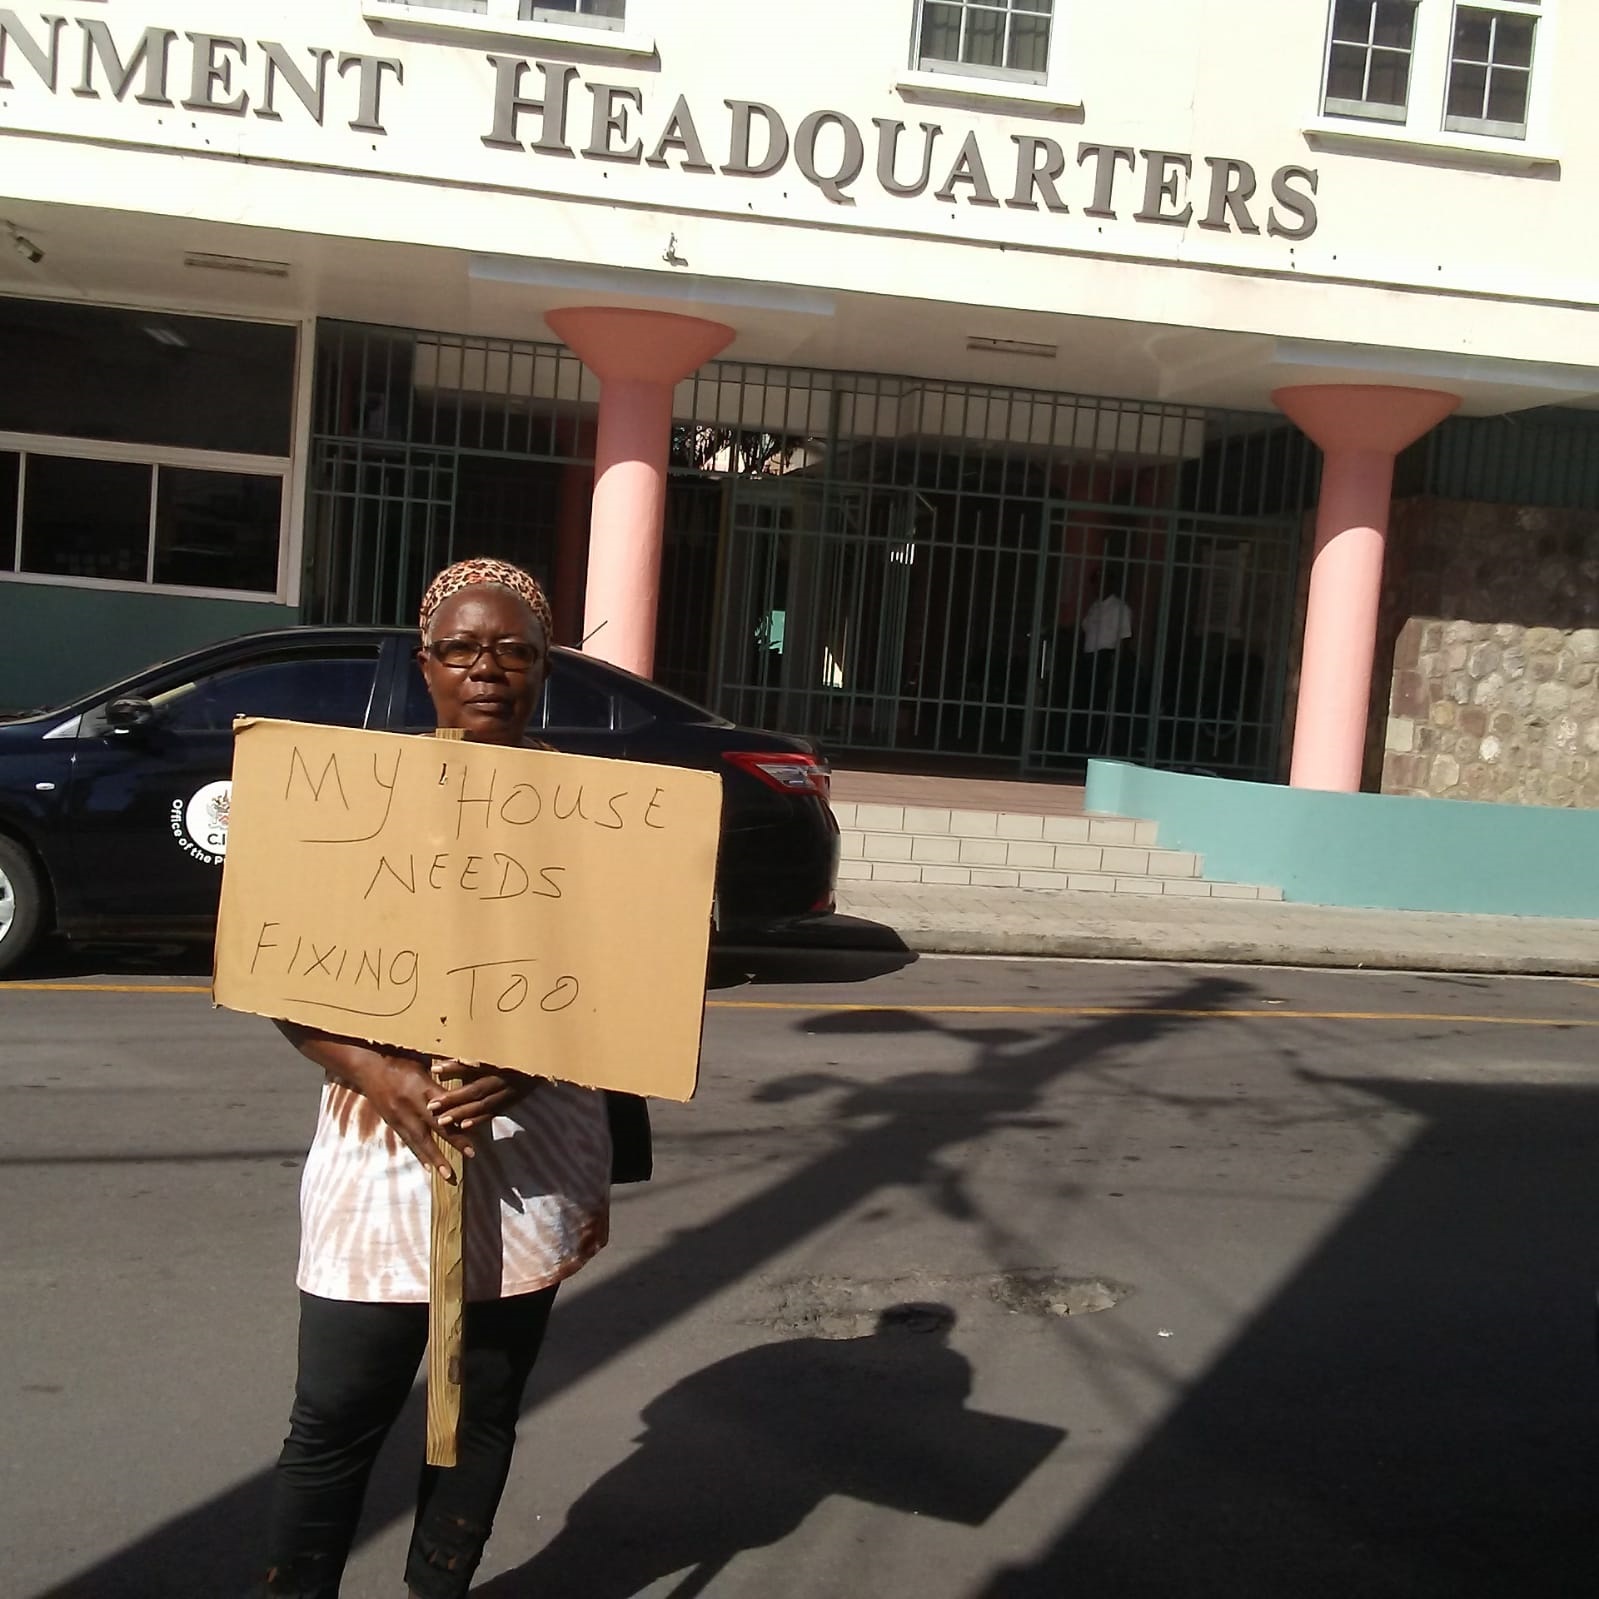 St Kitts resident is still pleading to get her roof fixed